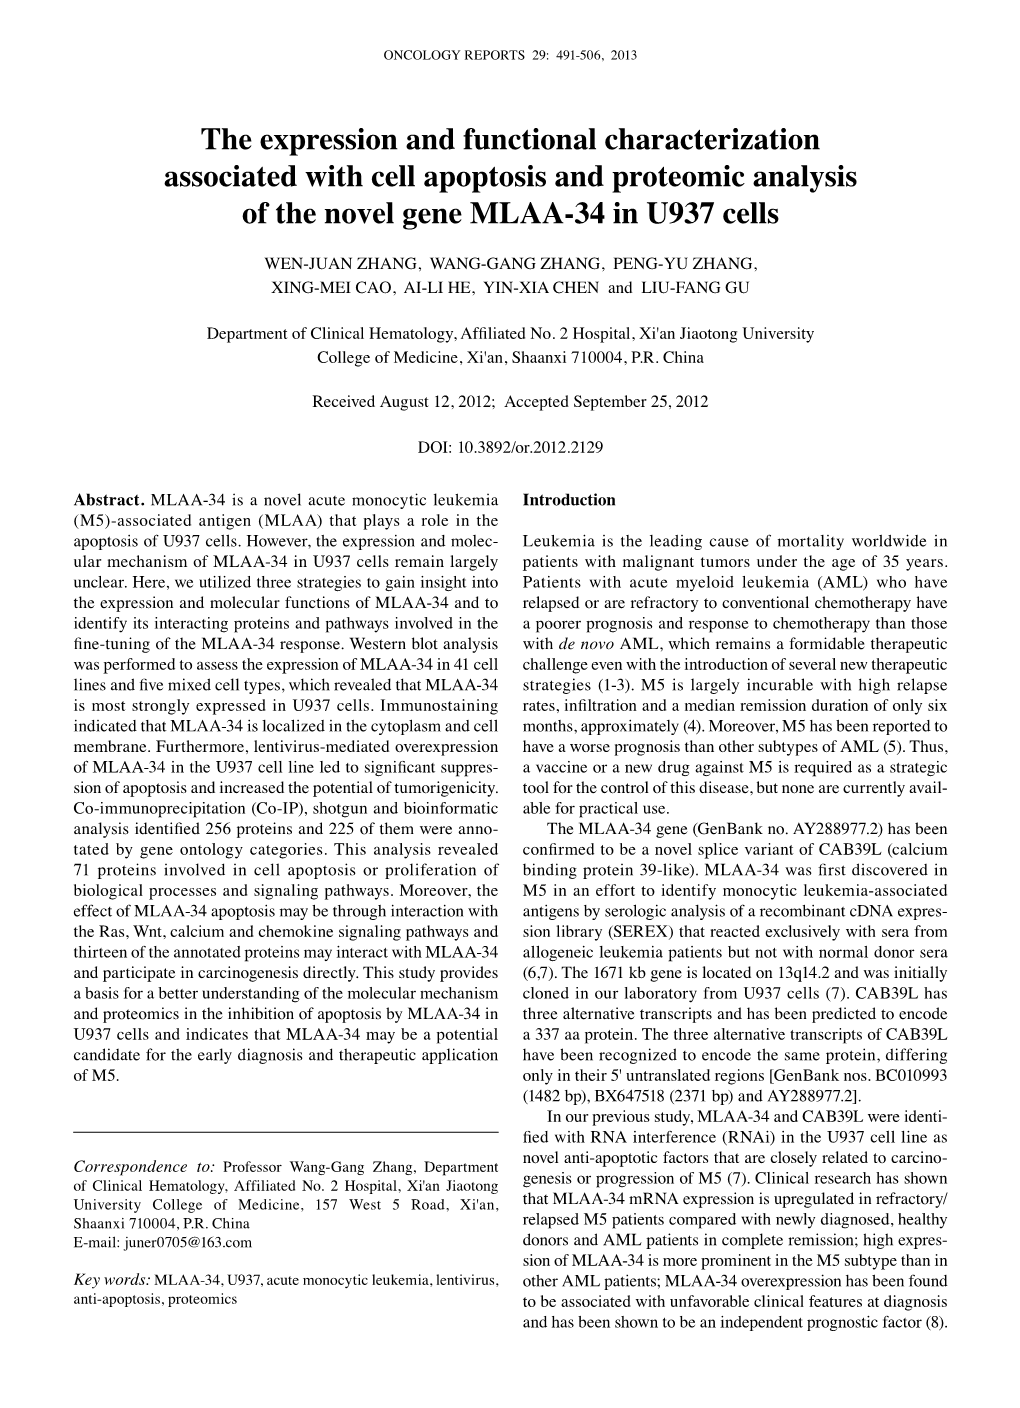 The Expression and Functional Characterization Associated with Cell Apoptosis and Proteomic Analysis of the Novel Gene MLAA-34 in U937 Cells